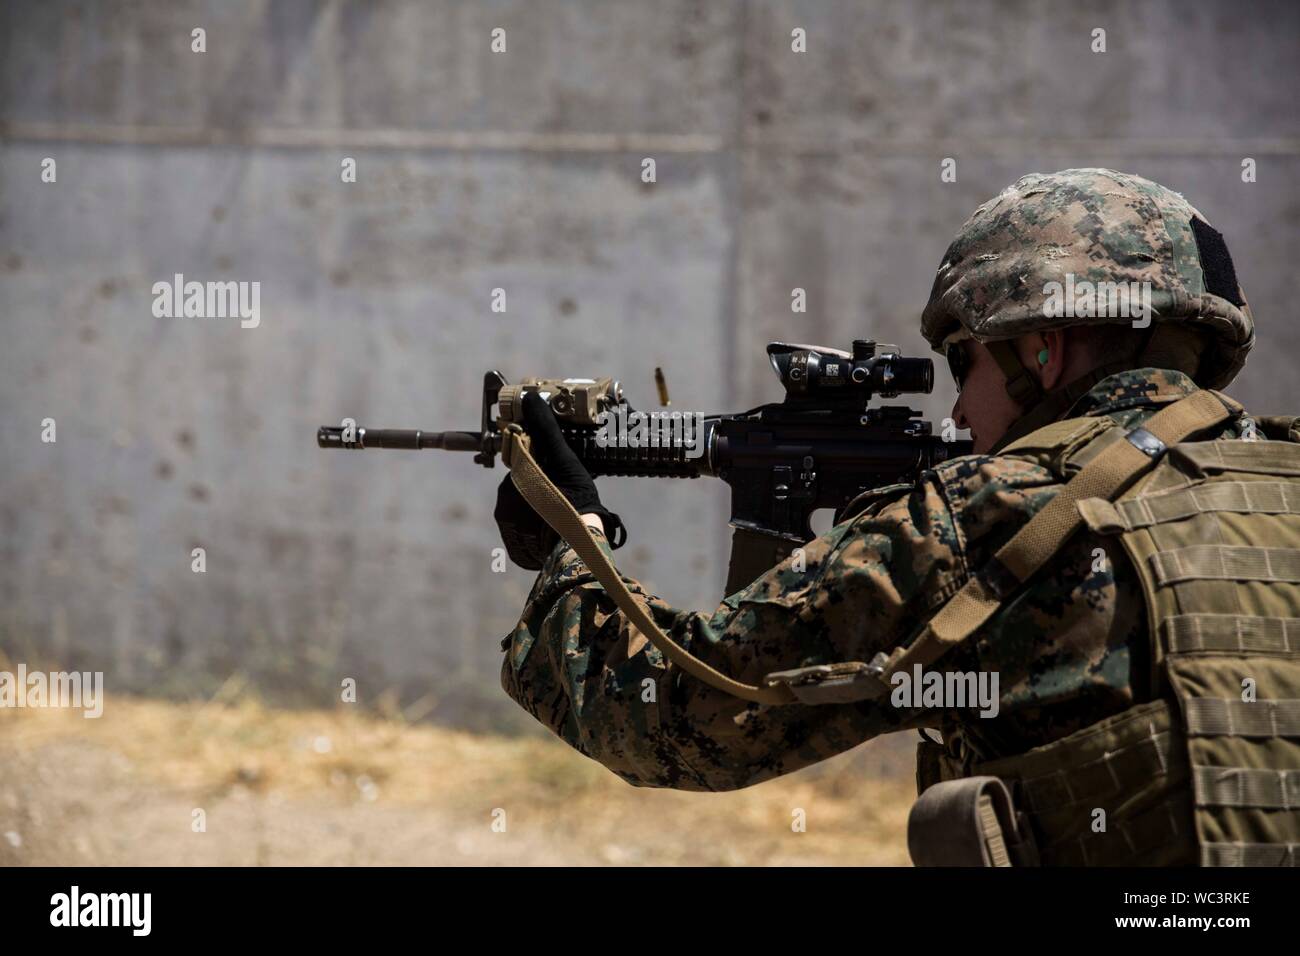 A U.S. Marine with Special Purpose Marine Air-Ground Task Force-Crisis Response-Africa 19.2, Marine Forces Europe and Africa, fires an M4 carbine during a table four range on Moron Air Base, Spain, Aug. 23, 2019. The Ground Combat Element maintains weapons handling procedures to increase proficiency as a crisis-response force. SPMAGTF is deployed to conduct crisis-response operations in Africa and promote regional stability by conducting military-to-military training exercises throughout Europe and Africa. (U.S. Marine Corps photo by Cpl. Margaret Gale) Stock Photo